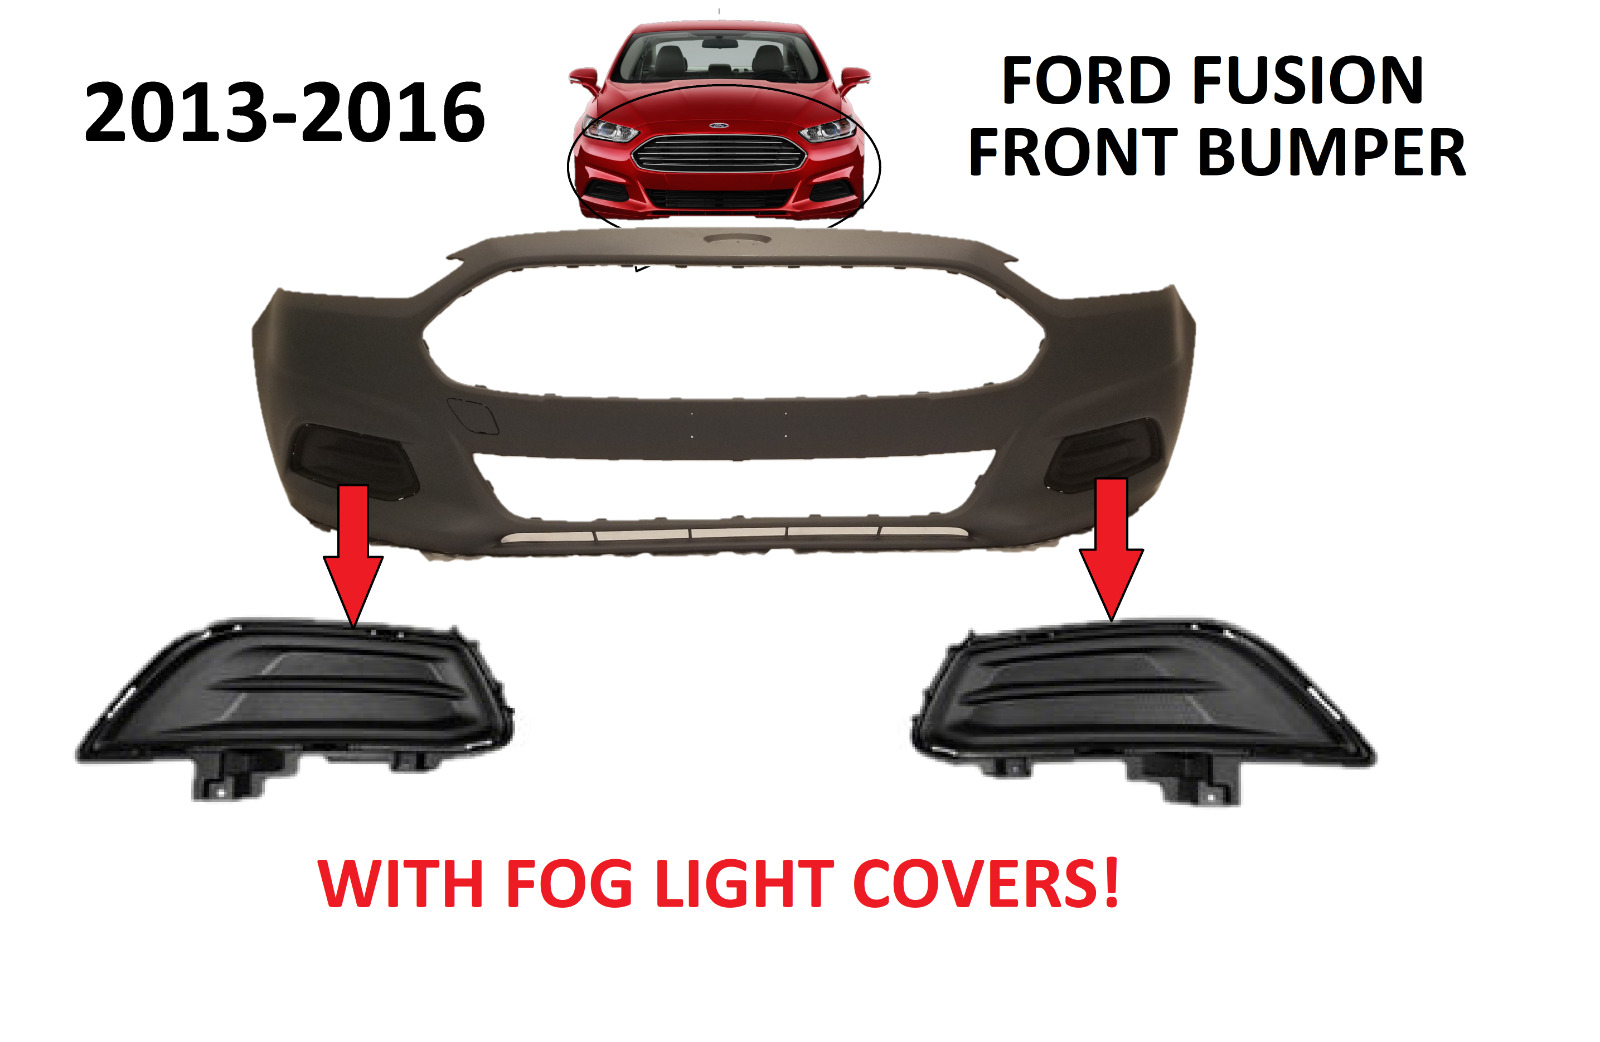 2013 2014 2015 2016 FORD FUSION FRONT BUMPER COVER WITH FOG LAMP COVER